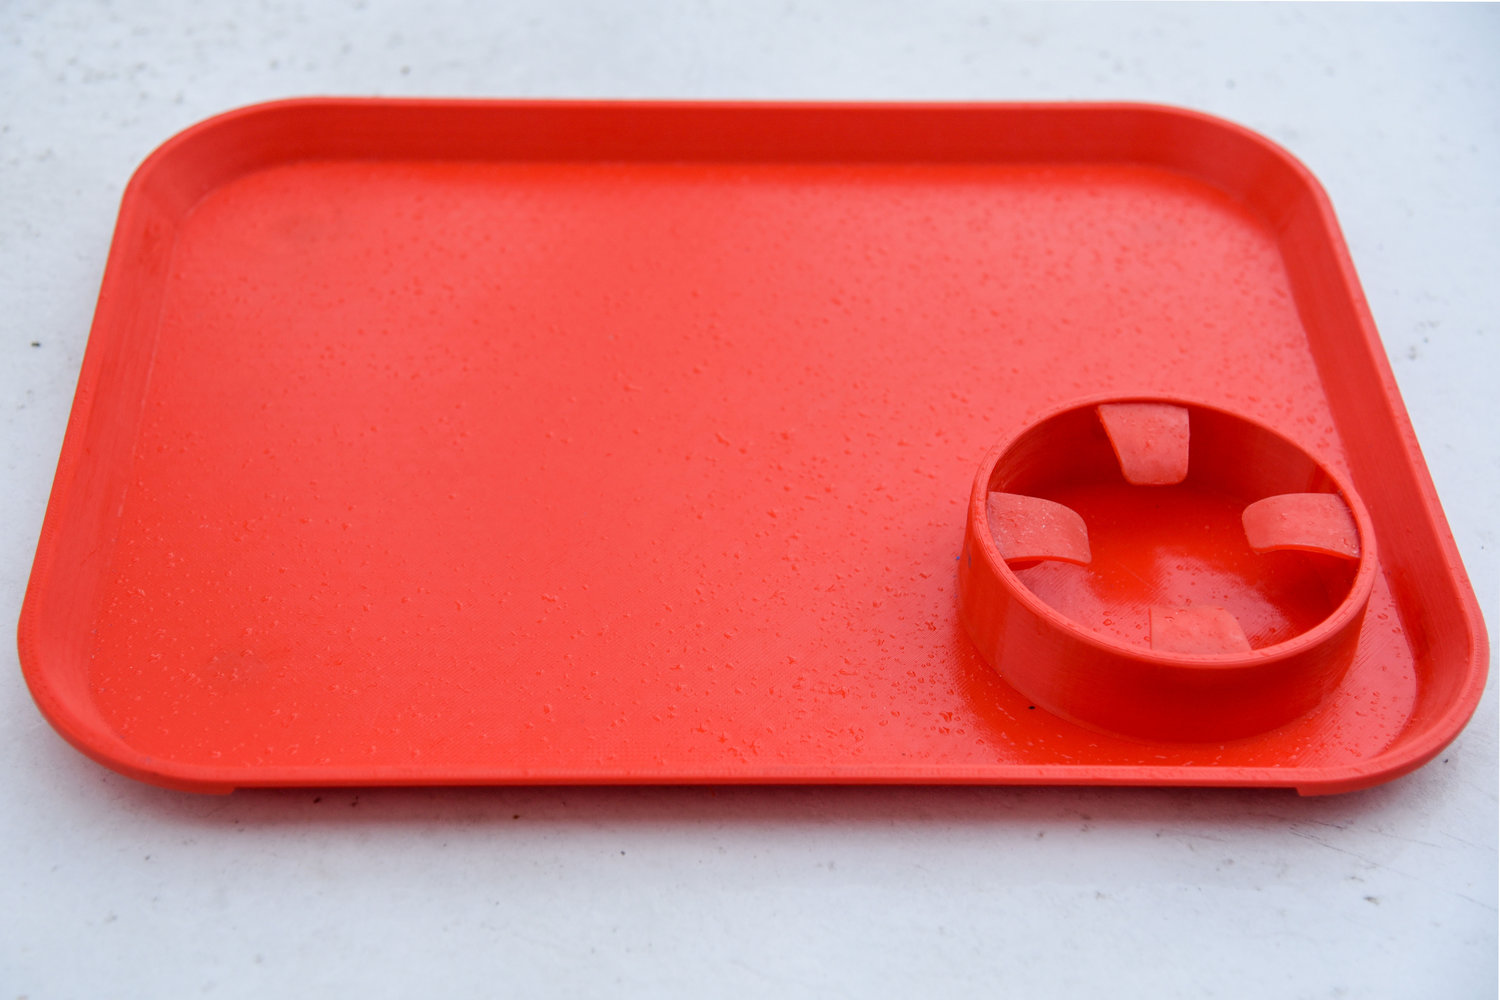 Ilana Herman’s independent feeding tray originated as a simple design with the potential to change the lives of those with neurological disorders or orthopedic injuries.